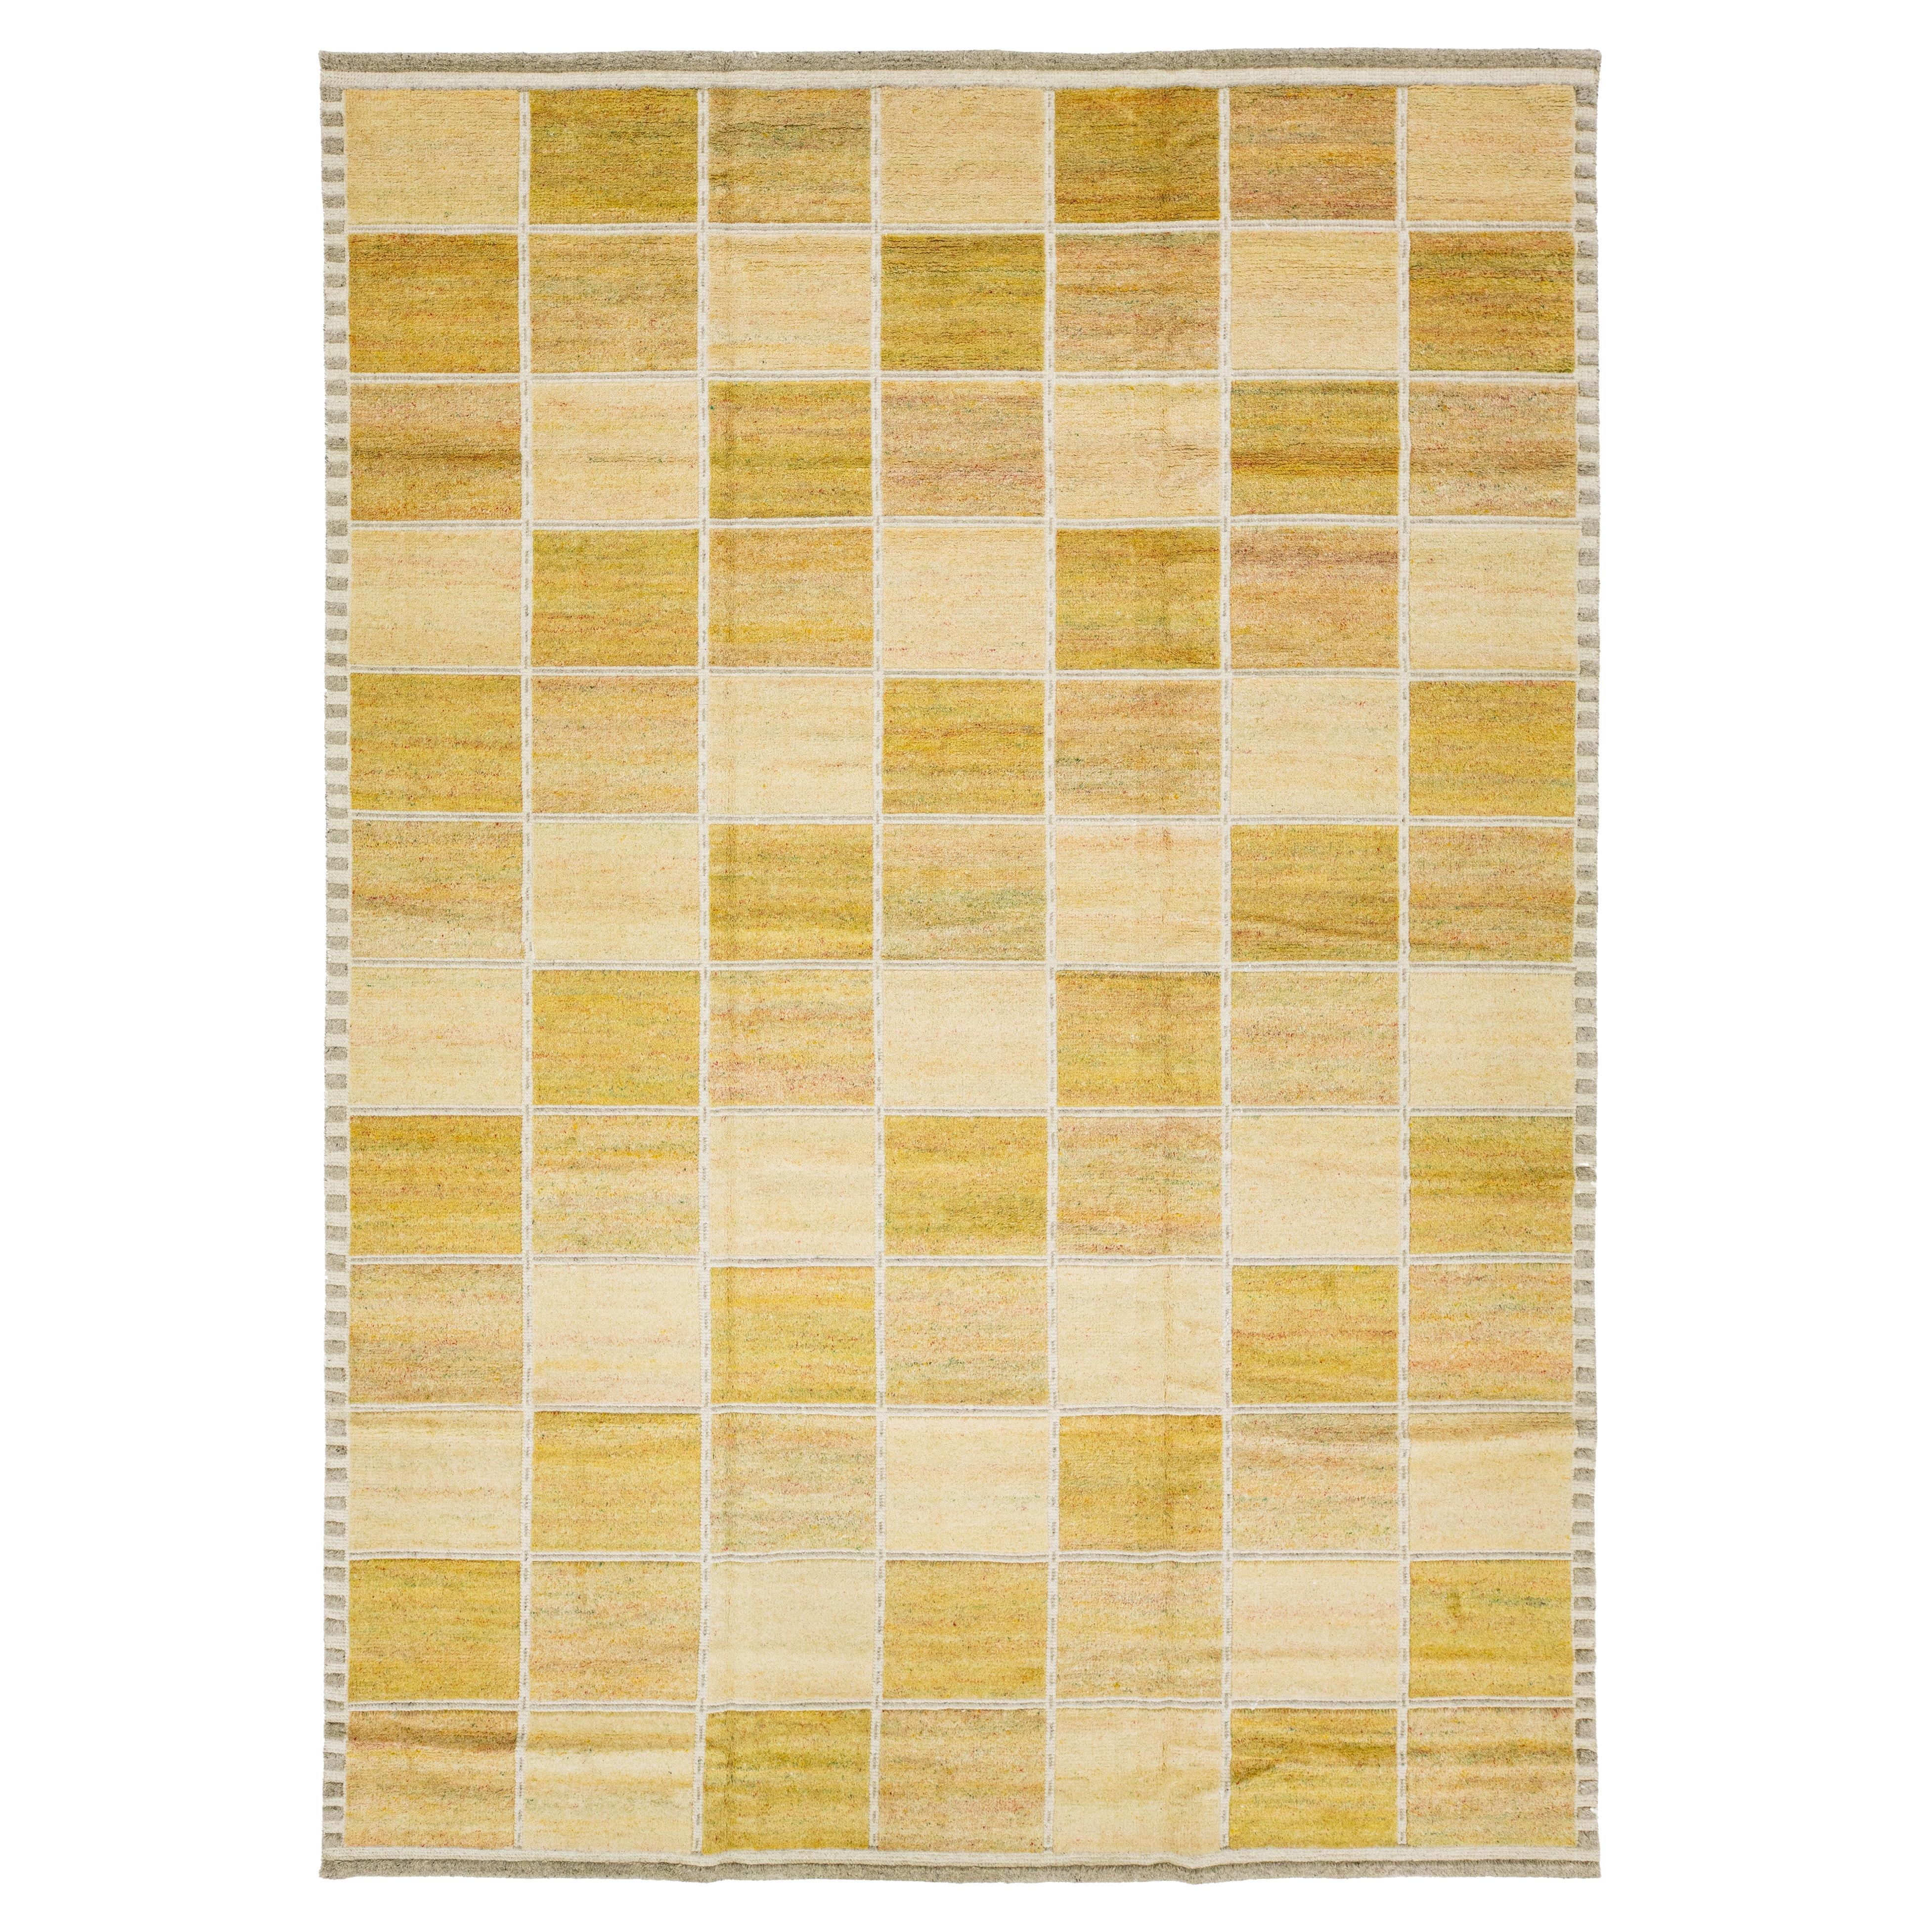  High-low Contemporary Scandinavian Style Wool Rug In Yellow and Beige Tones For Sale